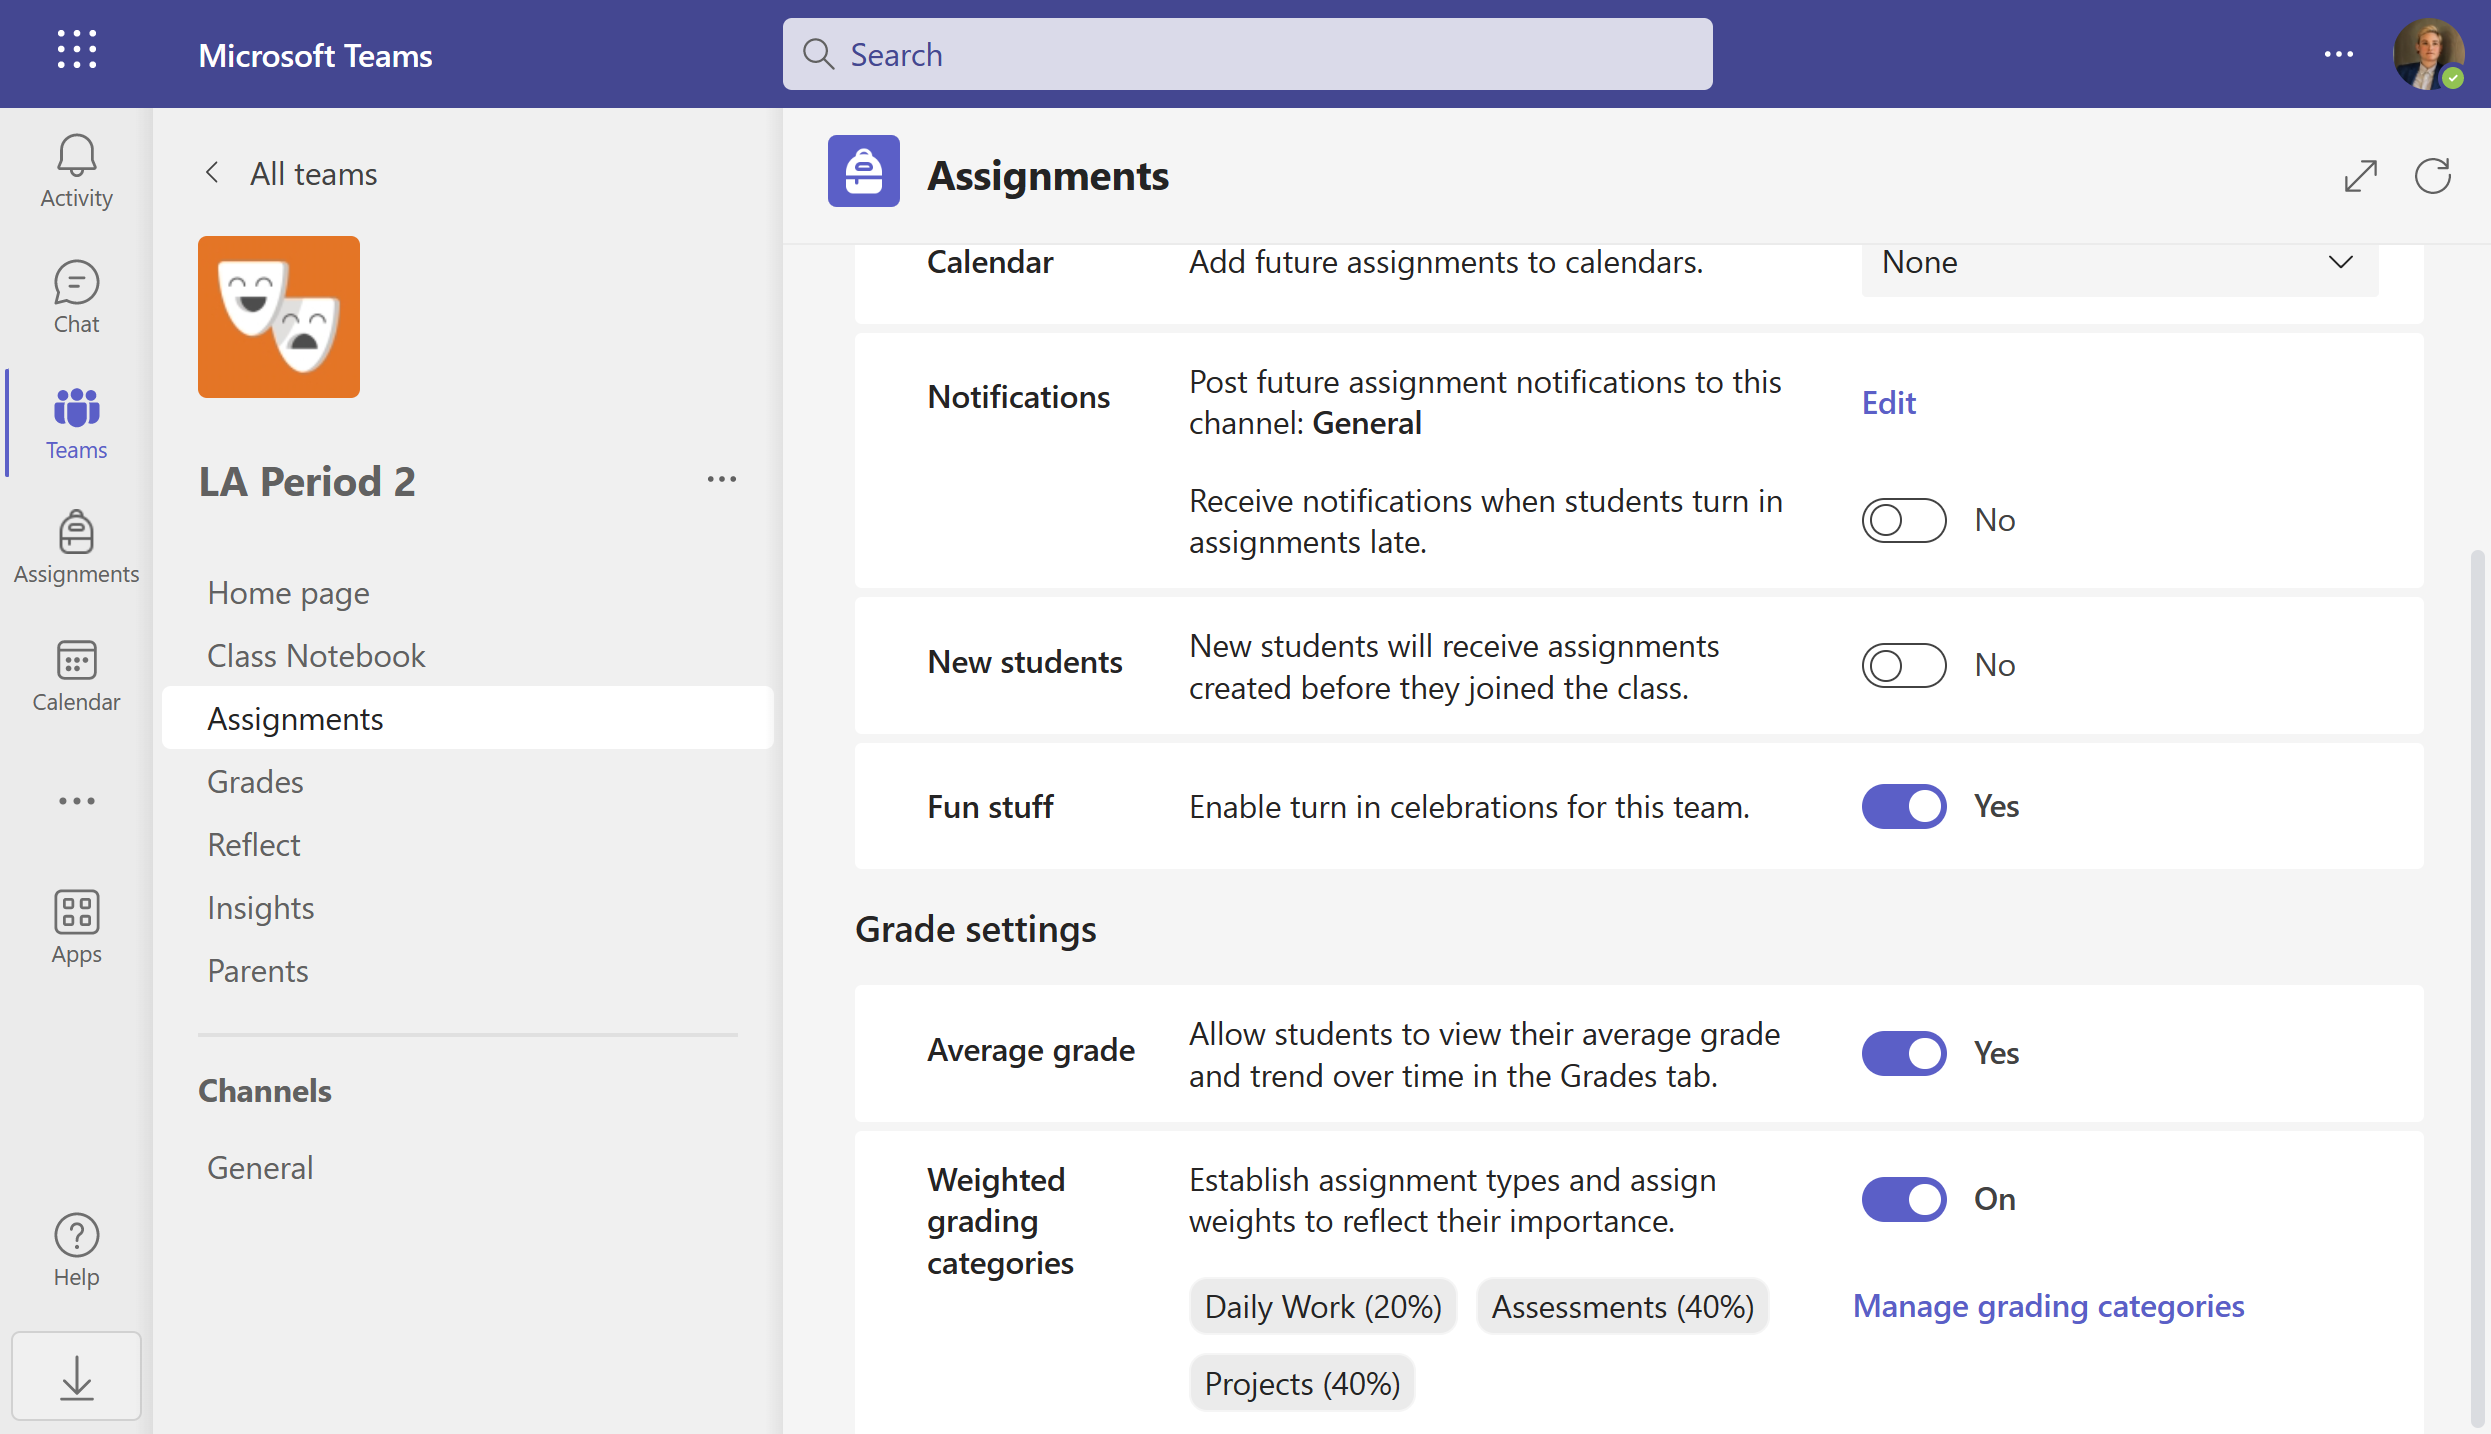 how to find homework on microsoft teams